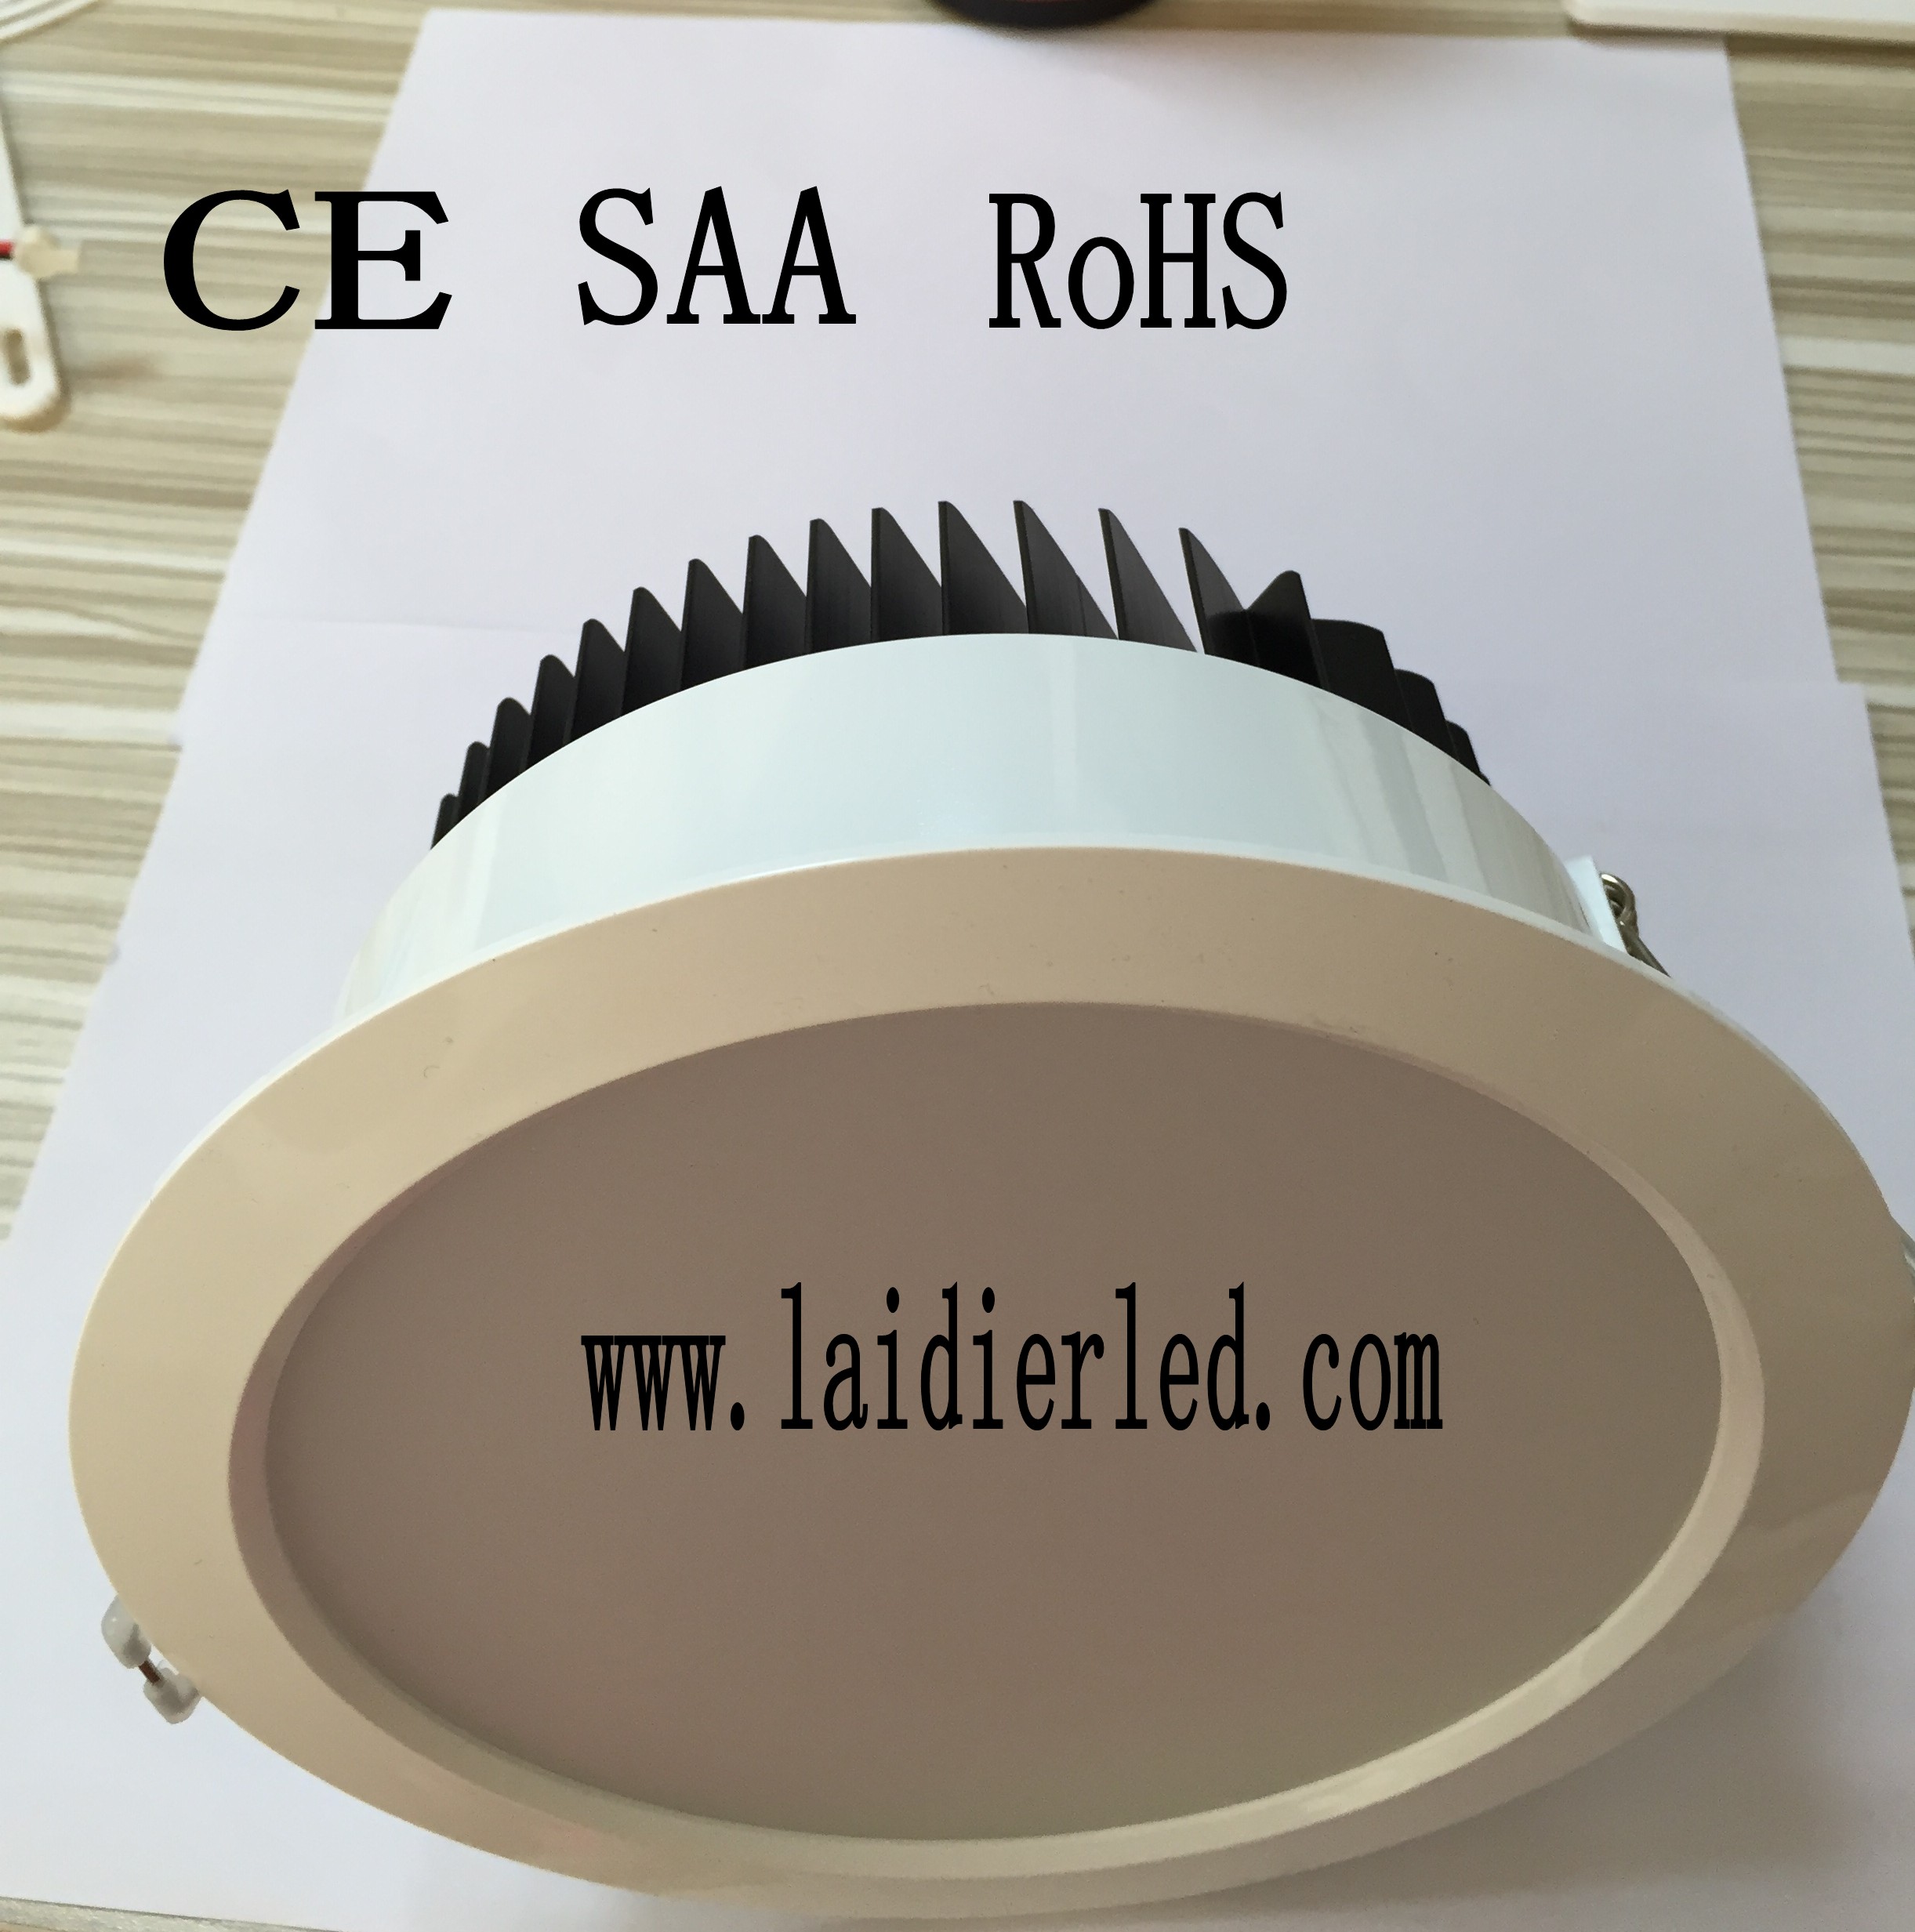 Best Selling high lumens LED Down Light 9W SMD8730 passed CE SAA 3 years warranty